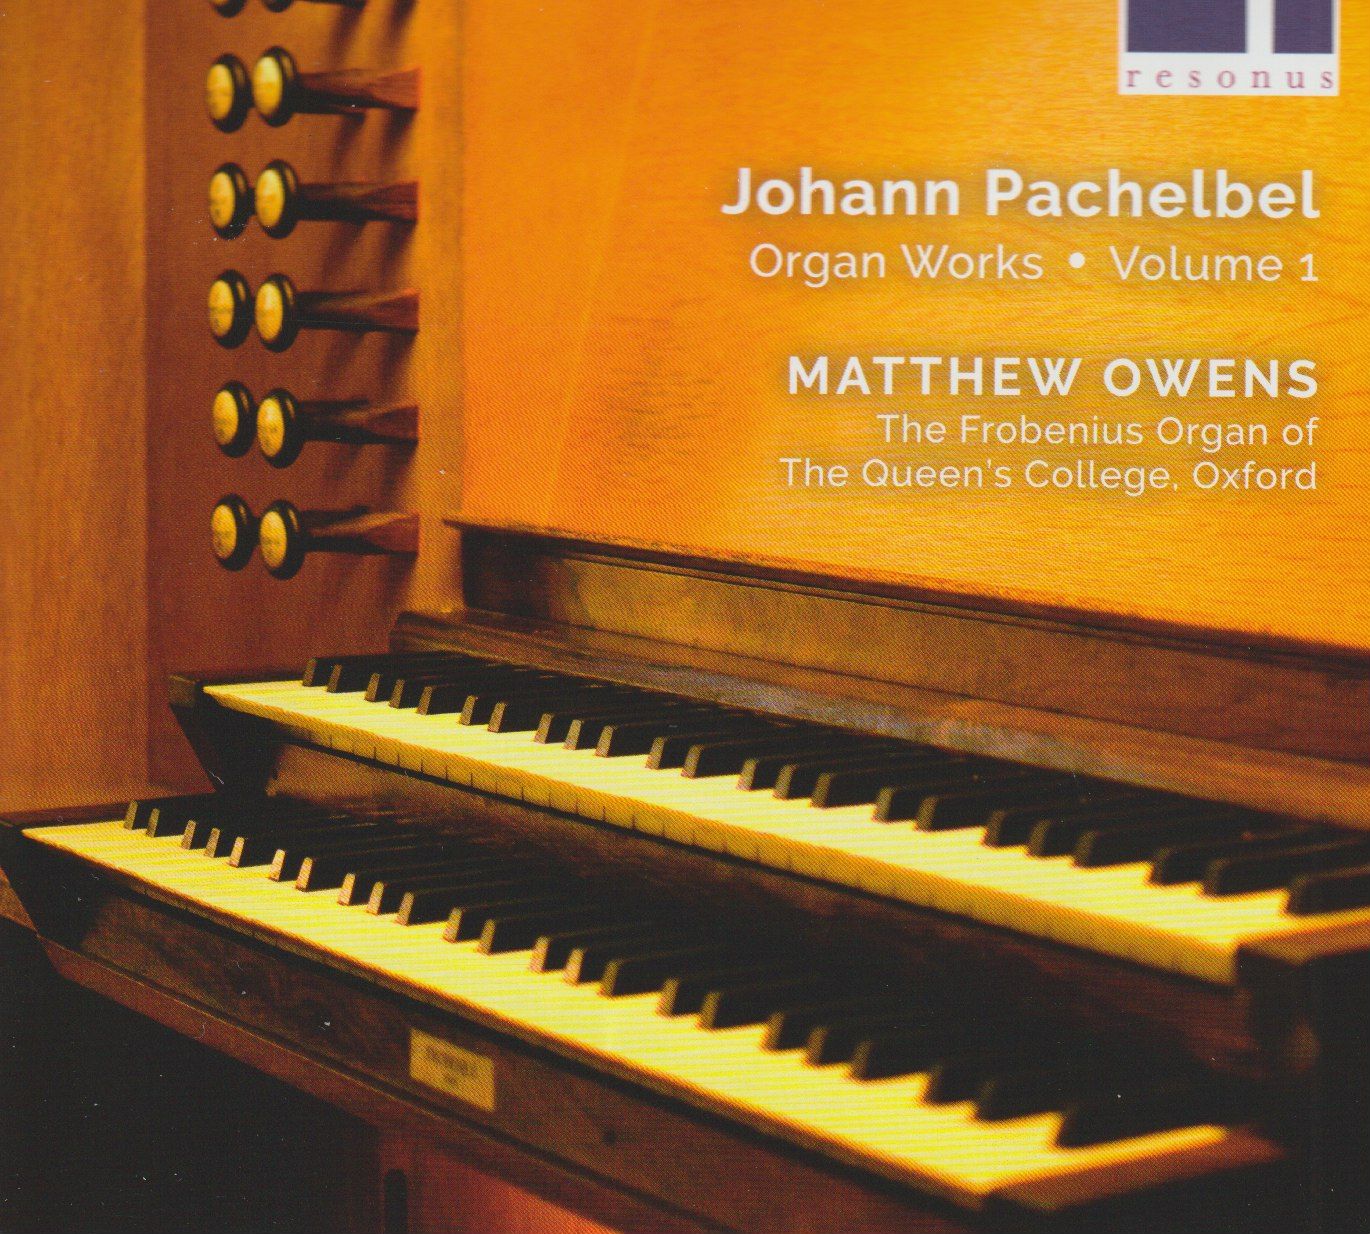 Matthew Owens launches his series of Pachelbel Organ Works